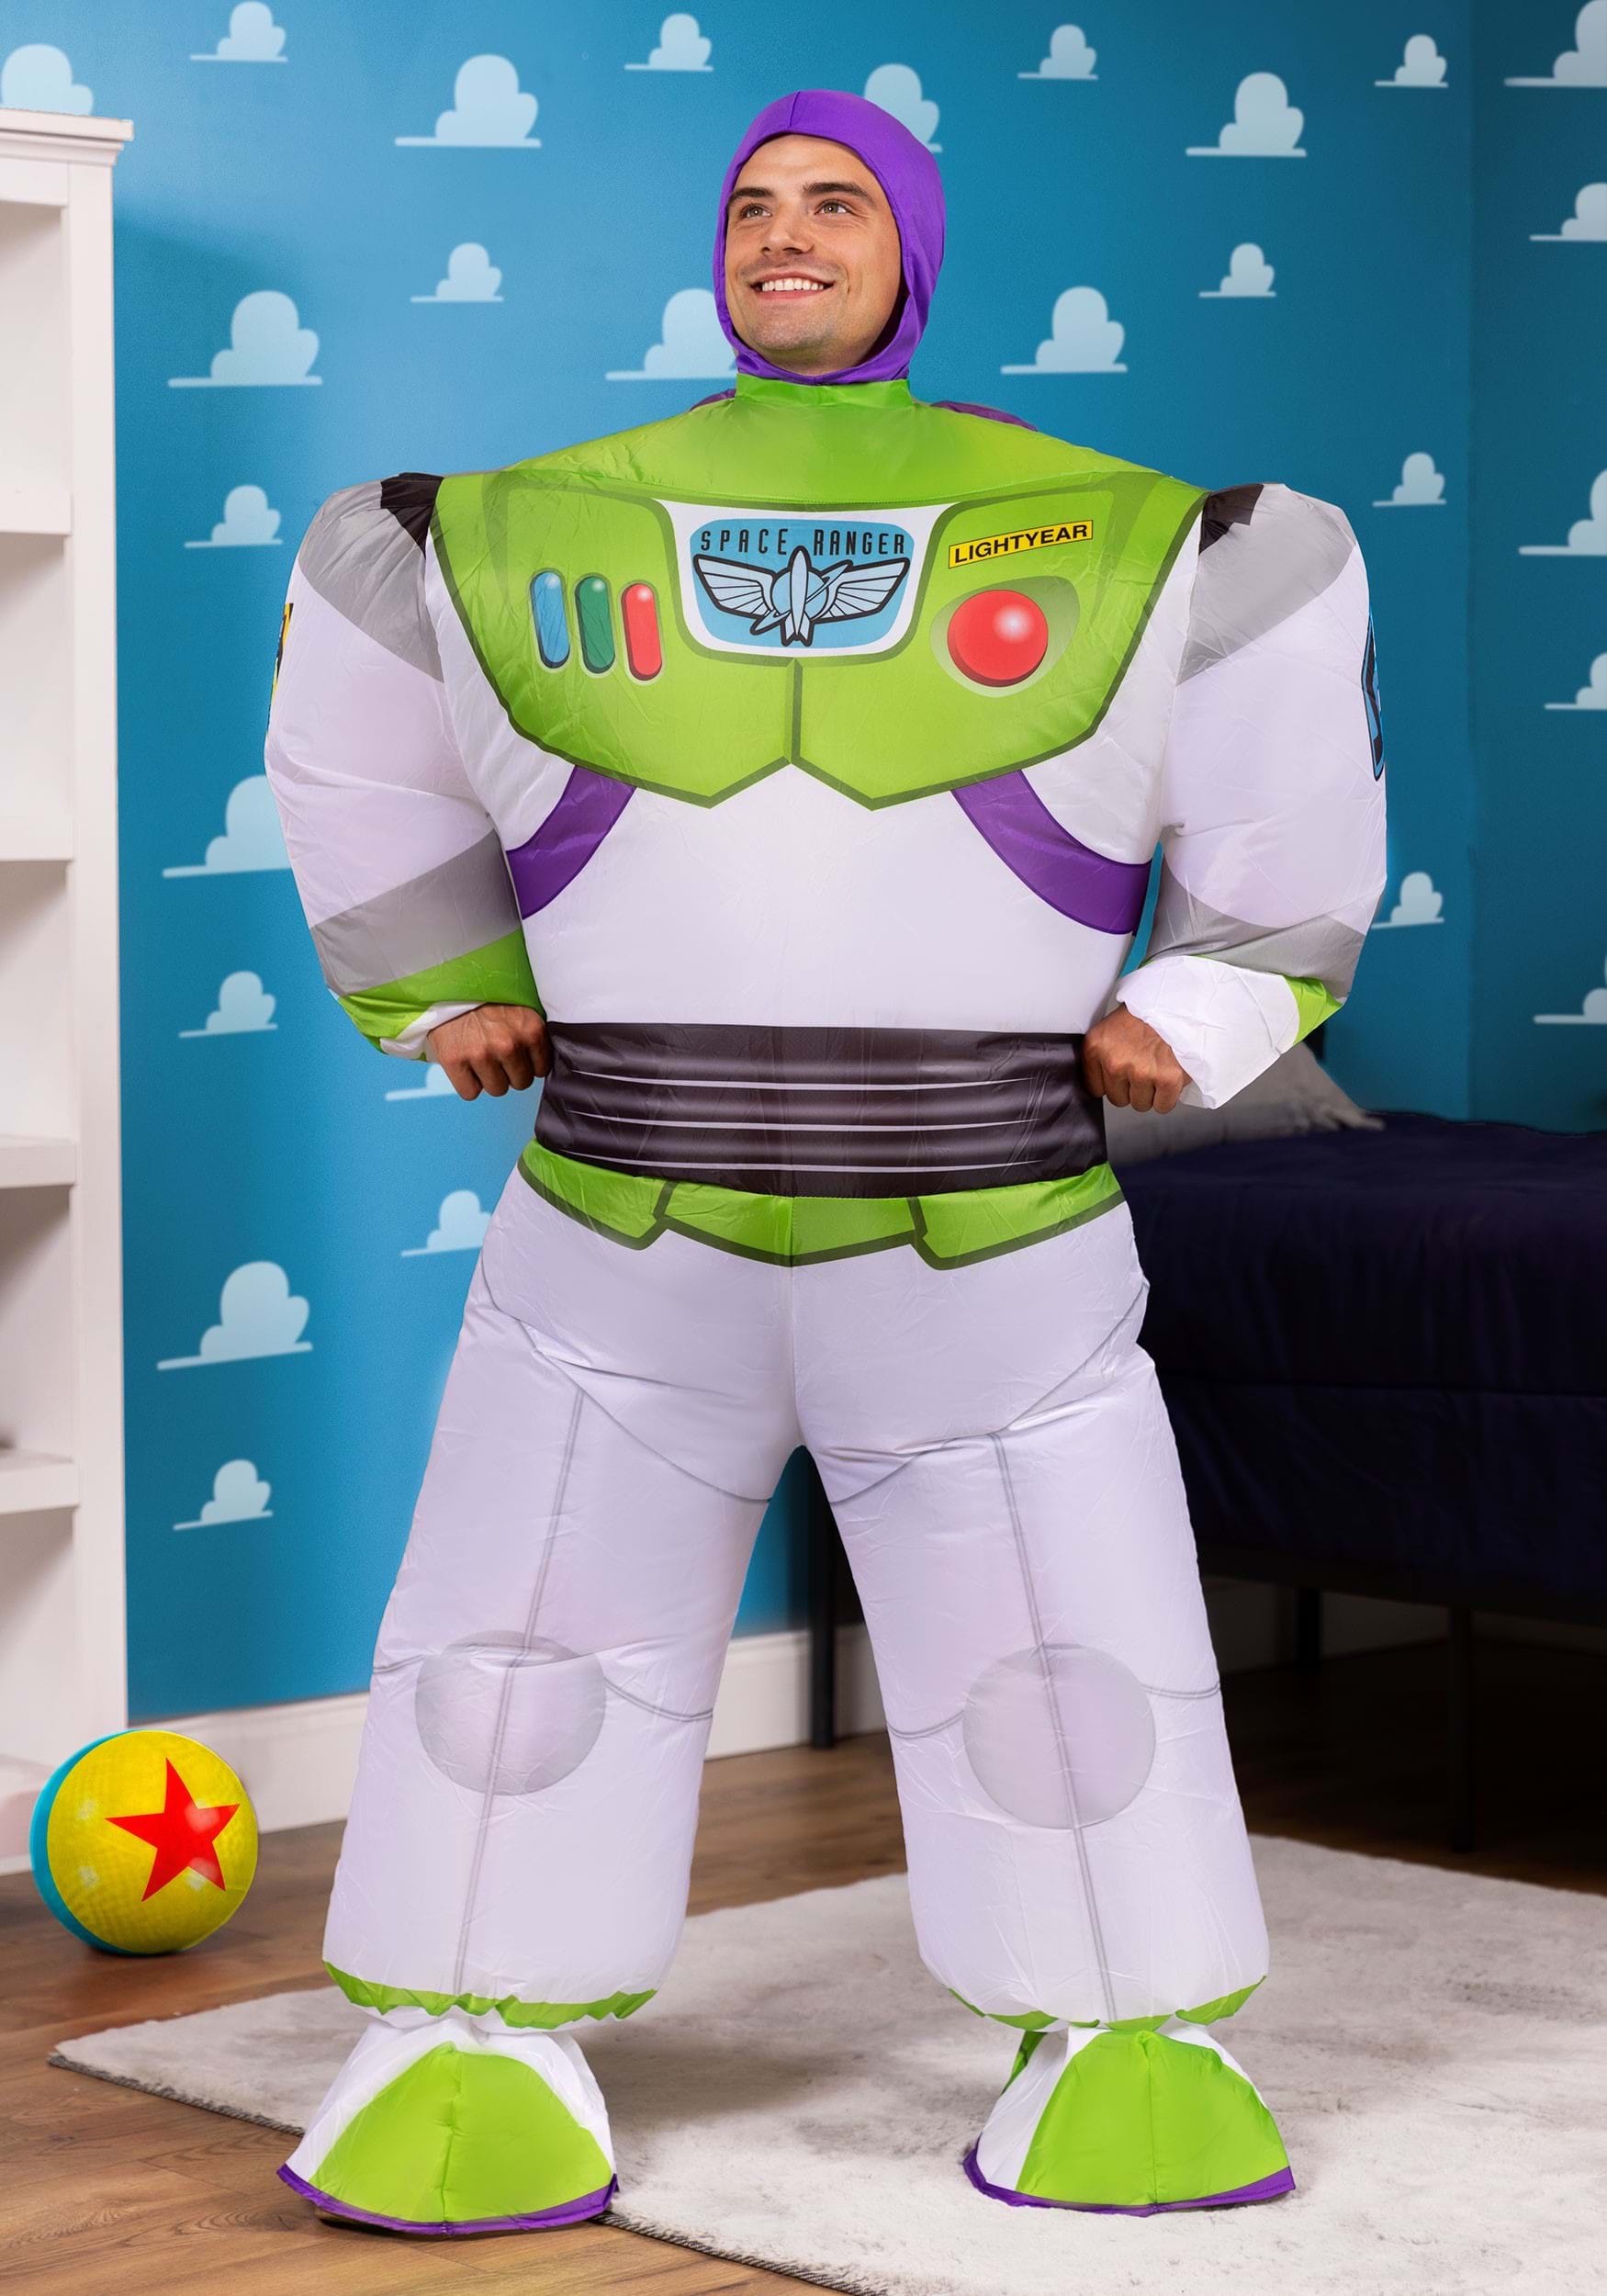 https://images.halloweencostumes.com/products/59154/1-1/toy-story-adult-buzz-lightyear-inflatable-costume-update.jpg